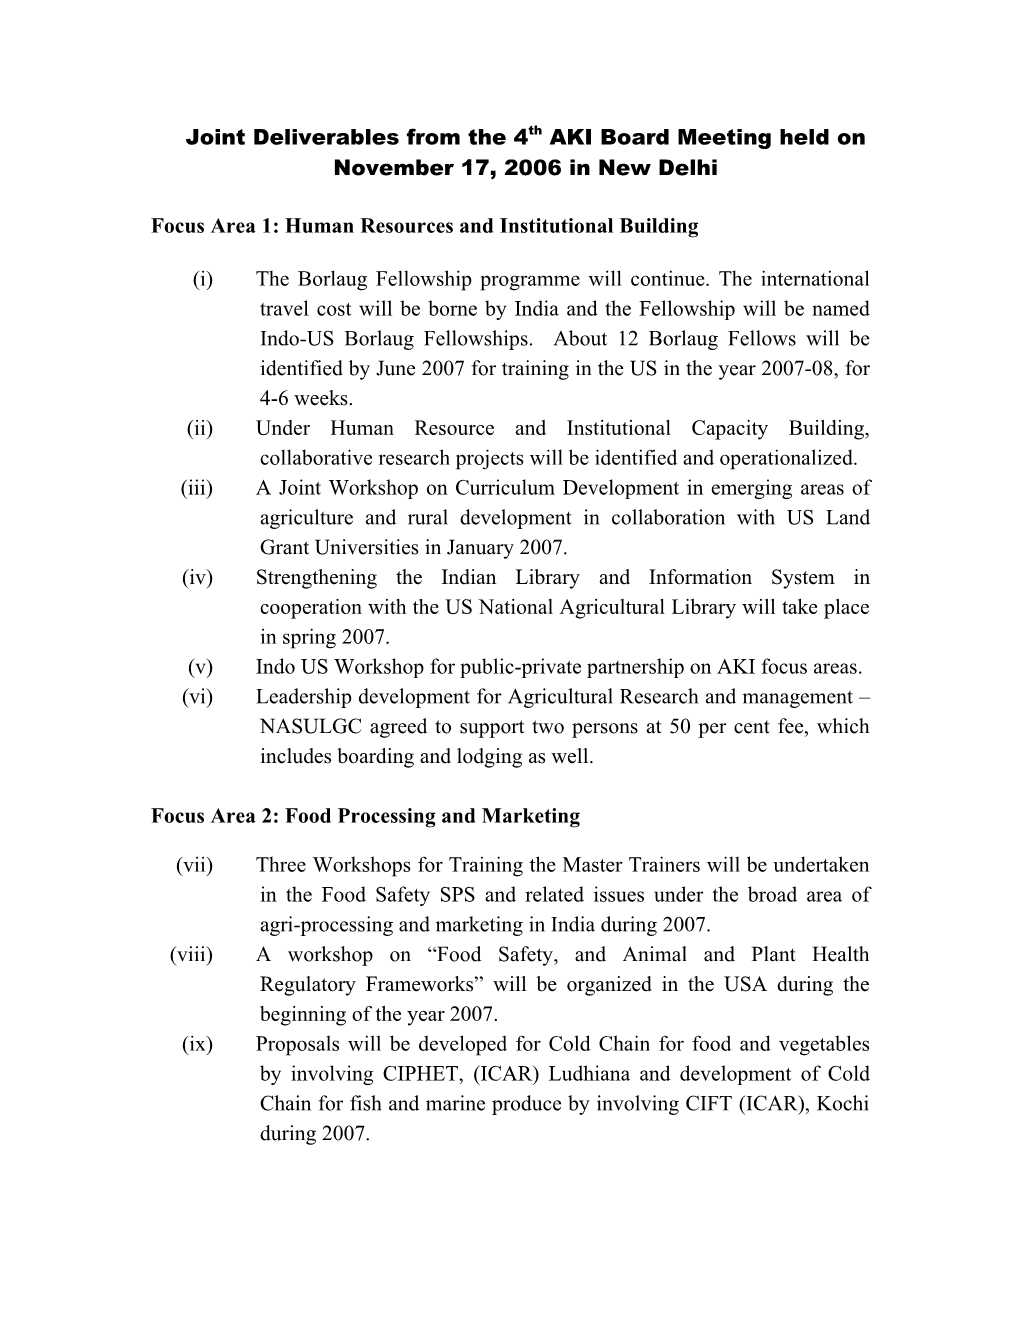 India US Agricultural Knowledge Initiative: Board Minutes